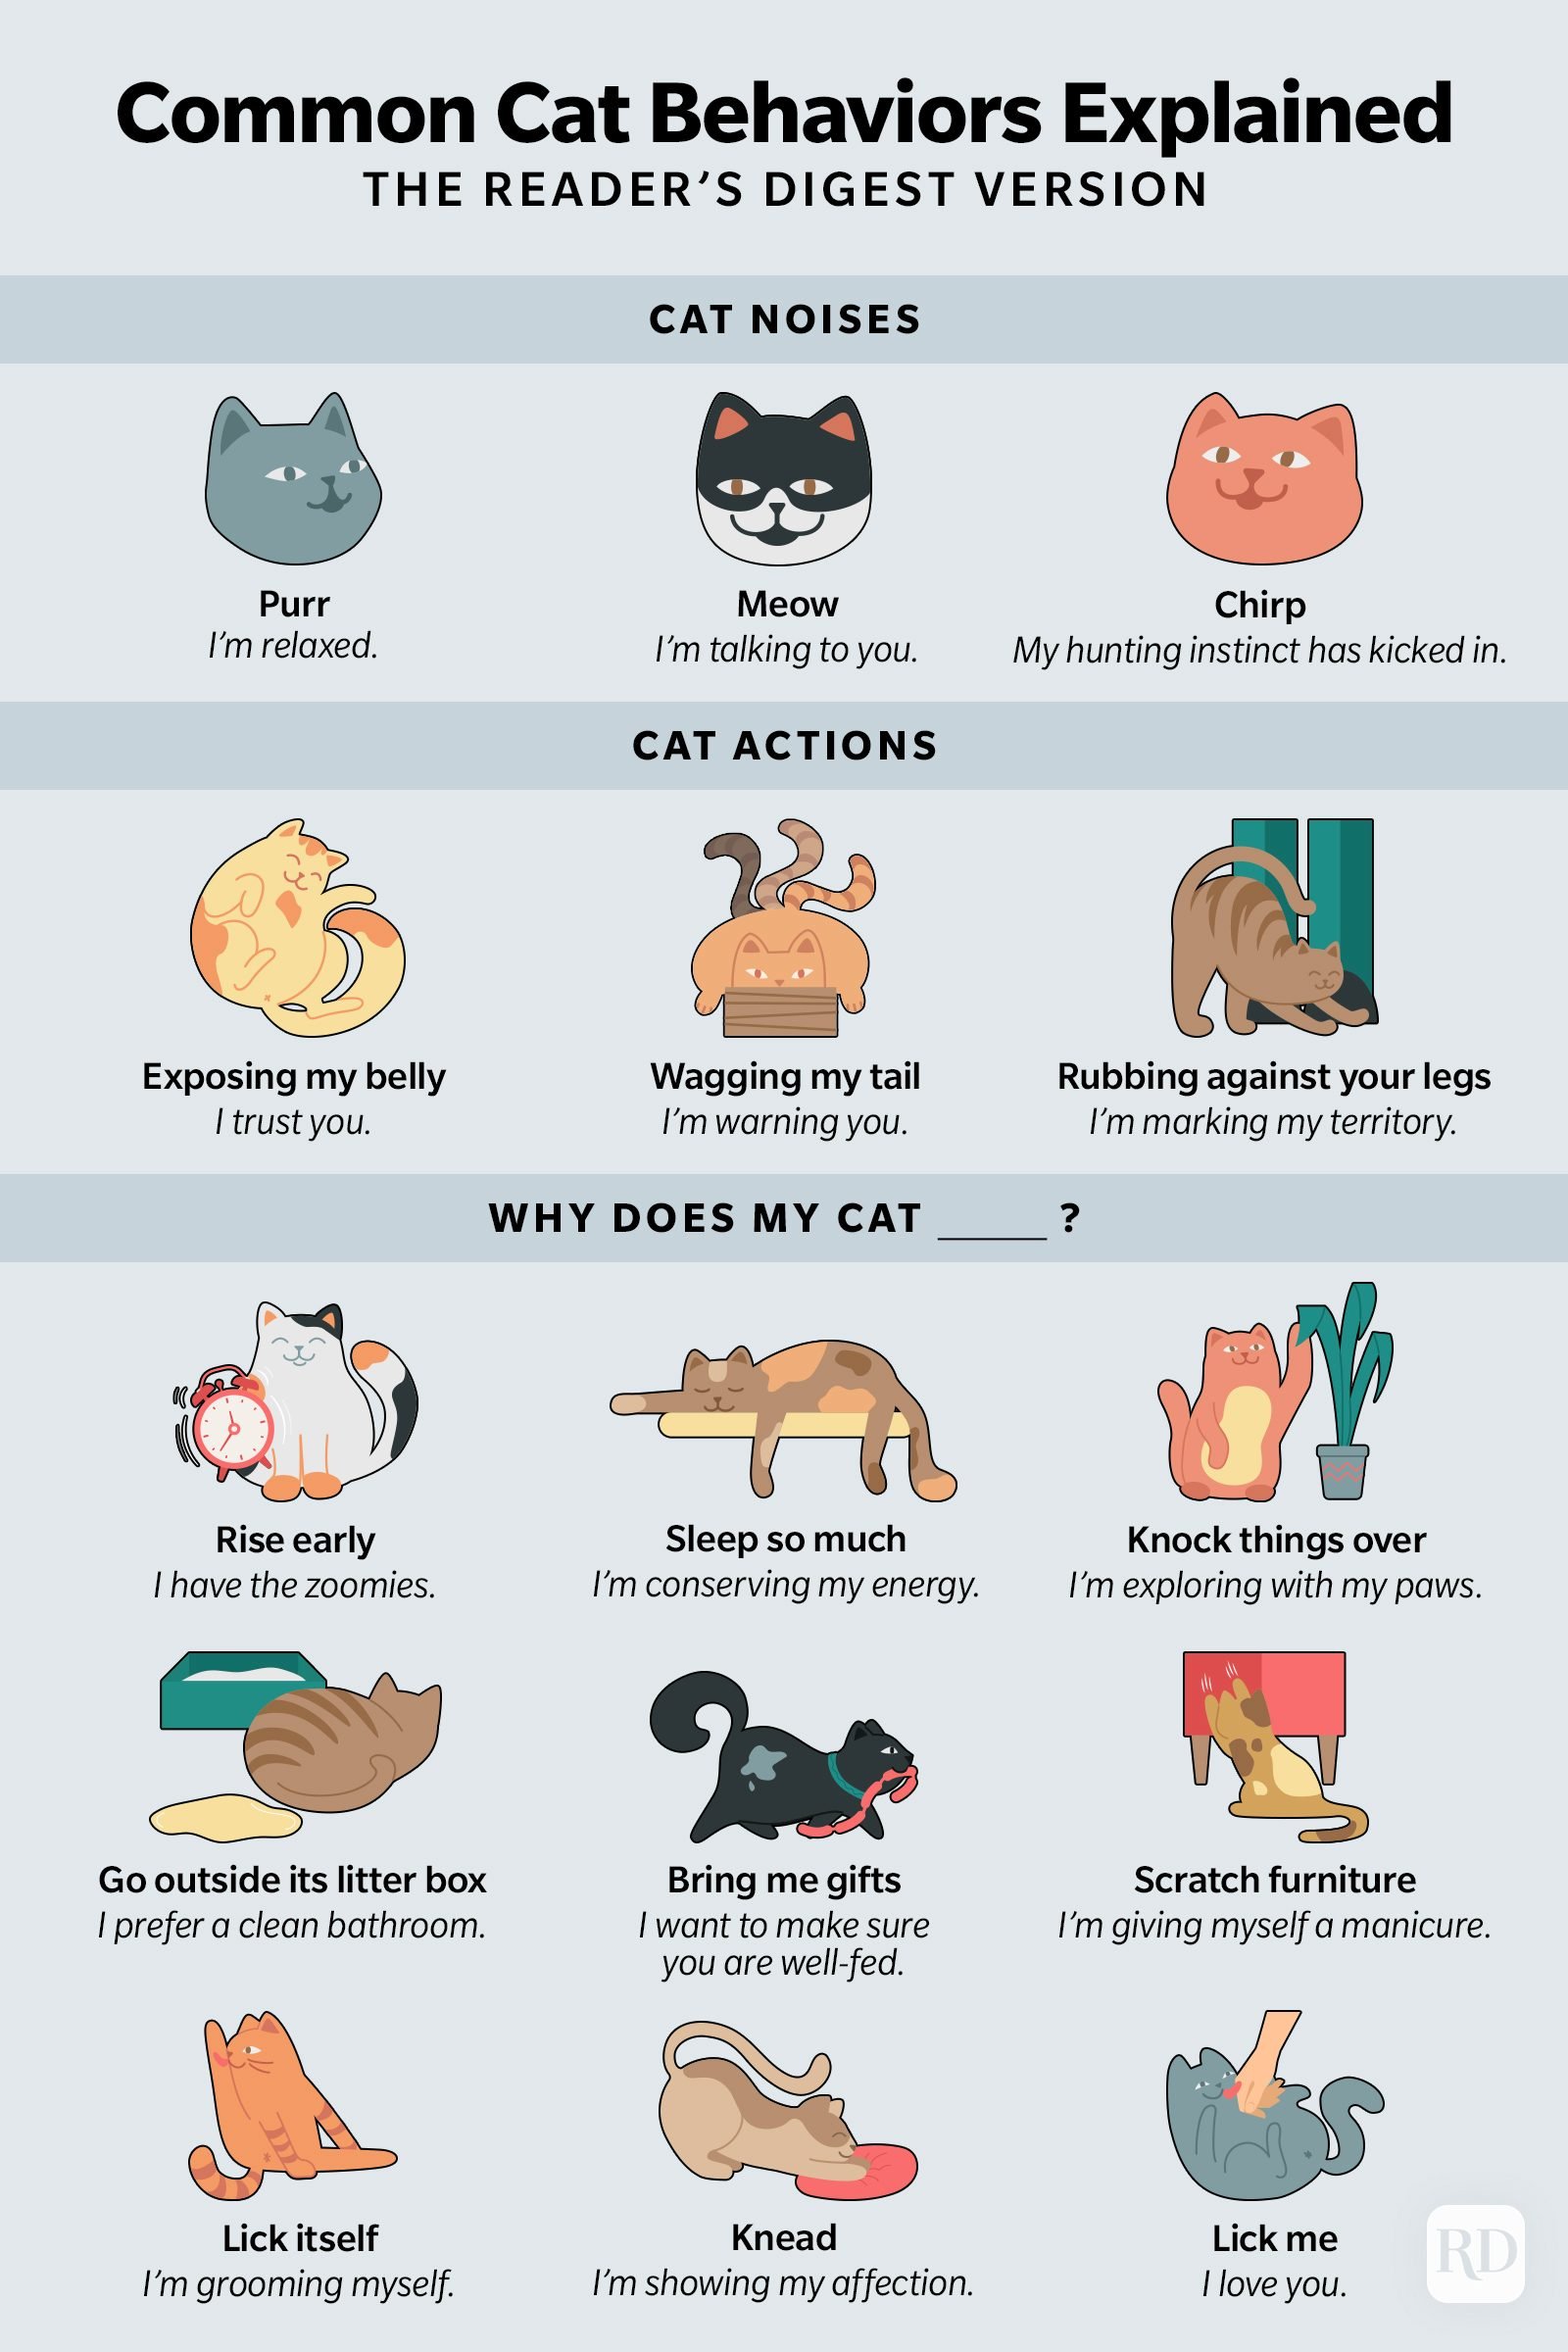 Cat Sounds and What They Mean